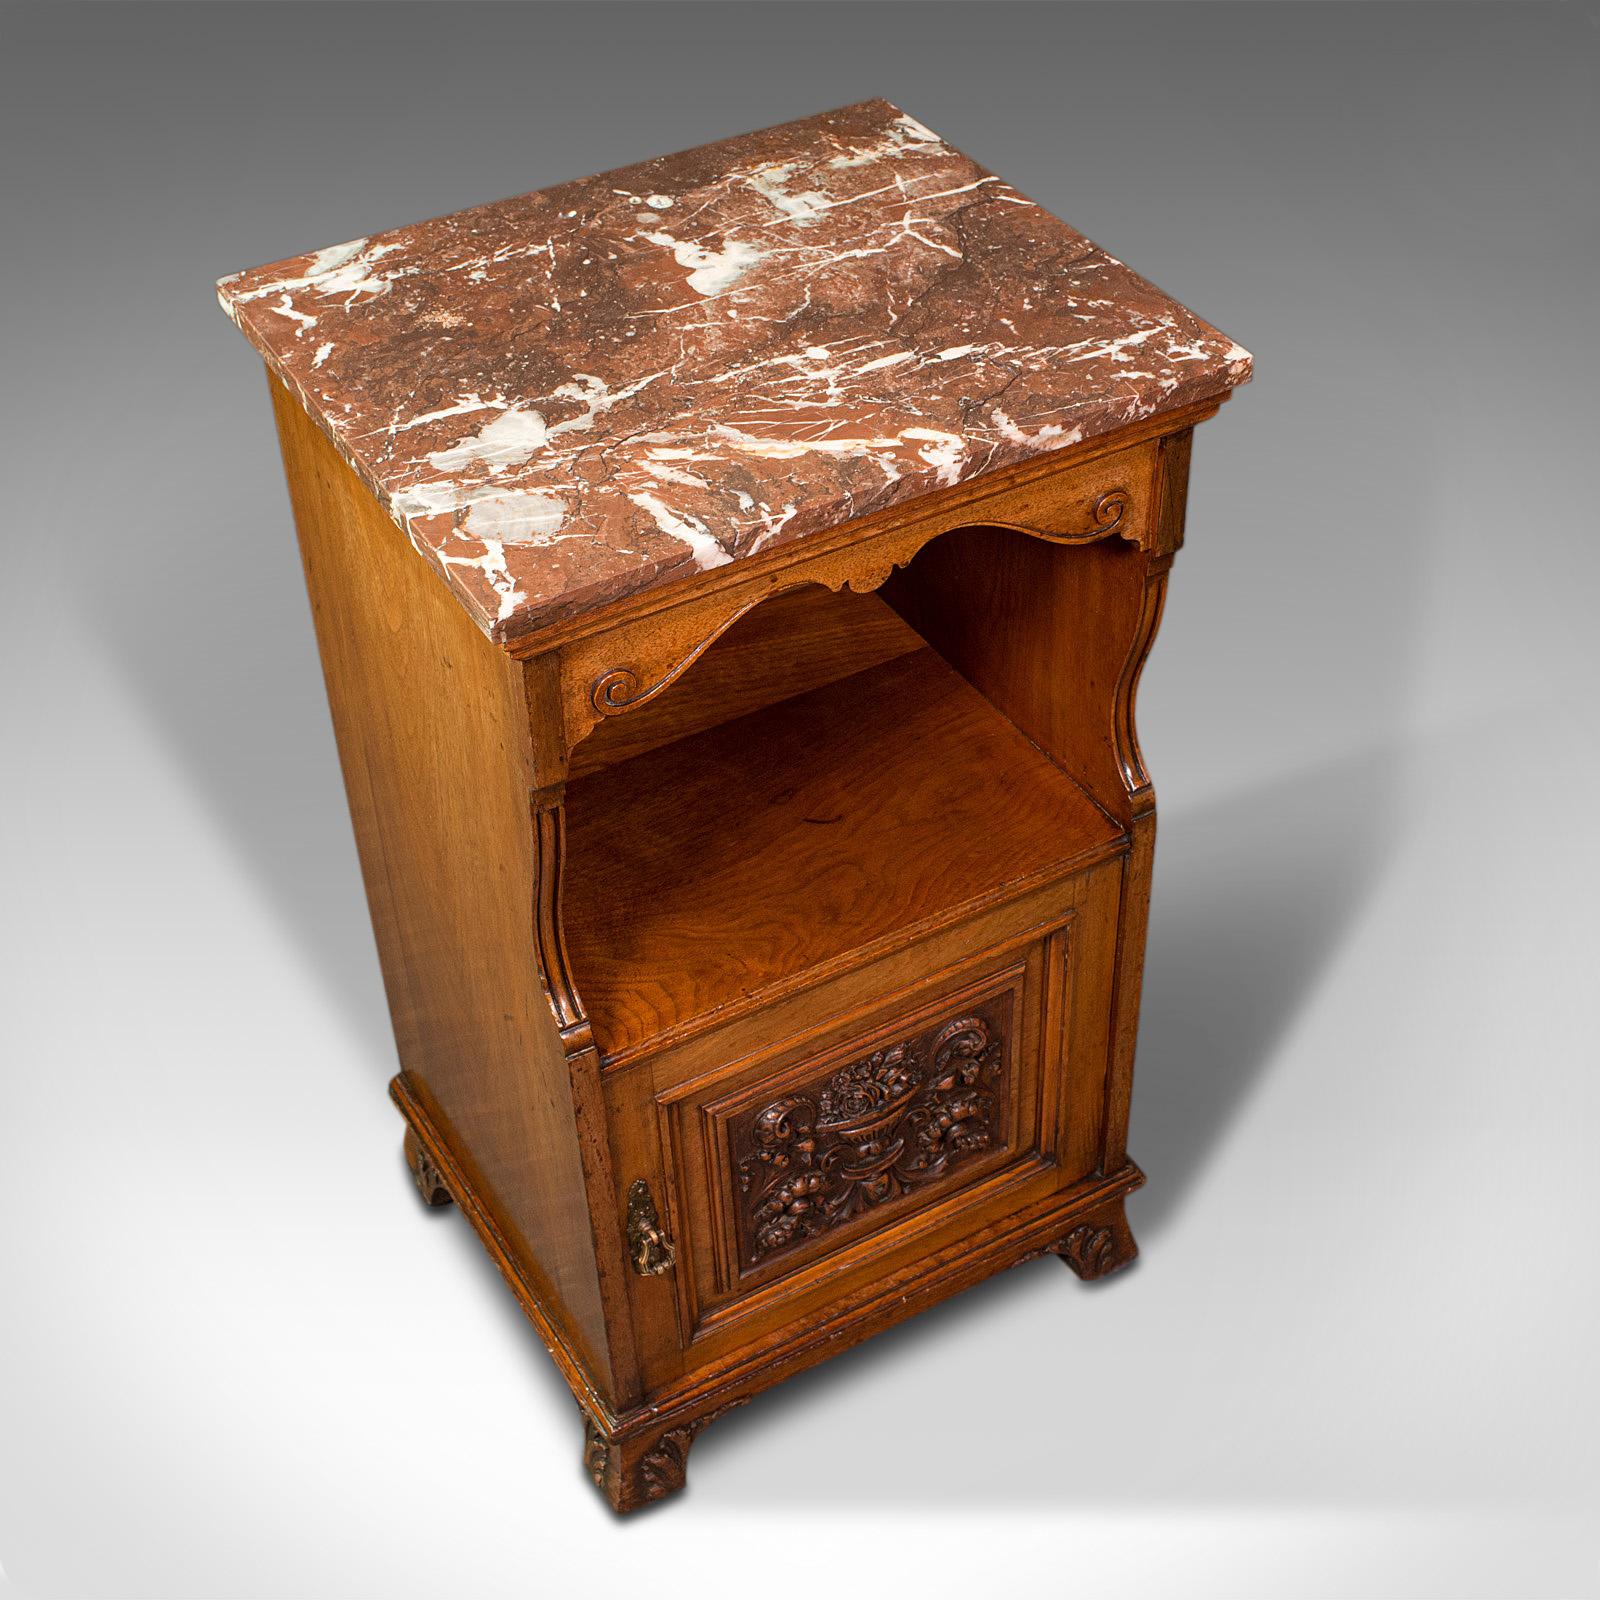 Antique Nightstand, English, Walnut, Bedside Cabinet, Gillow & Co, Victorian In Good Condition For Sale In Hele, Devon, GB